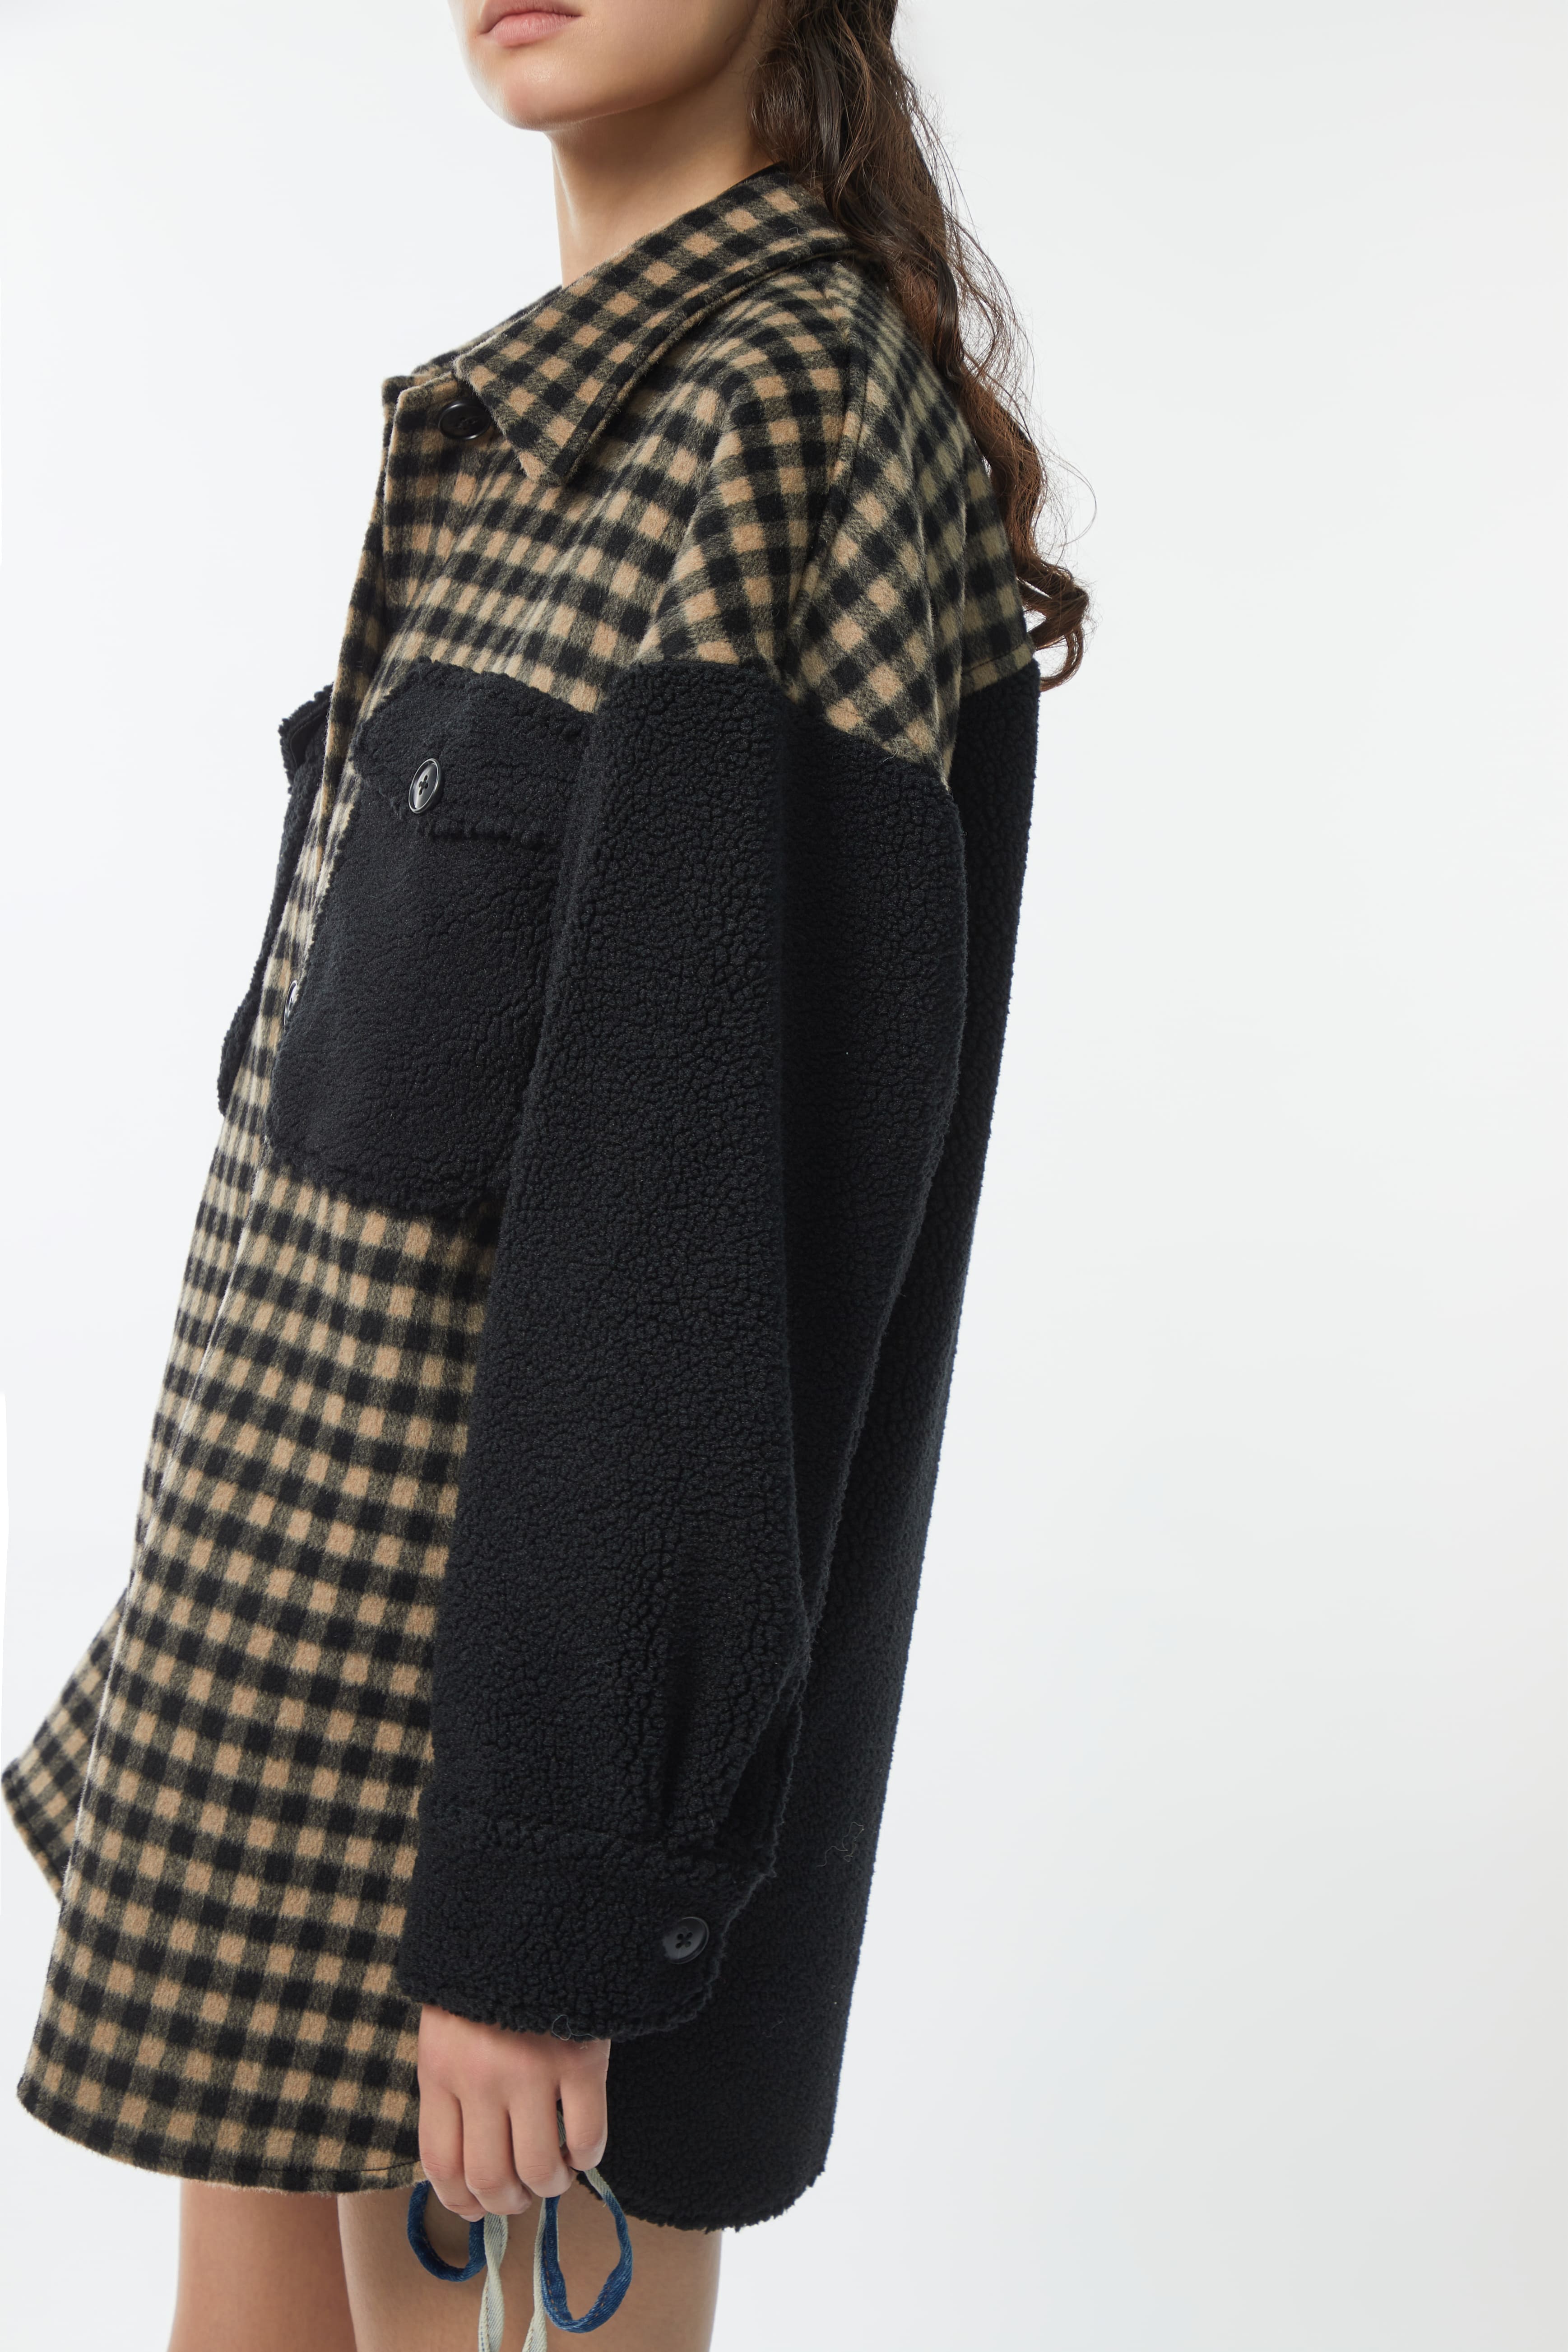 Khaki and Black Checkered Patchwork Flannel Shirt Coat - By Quaint